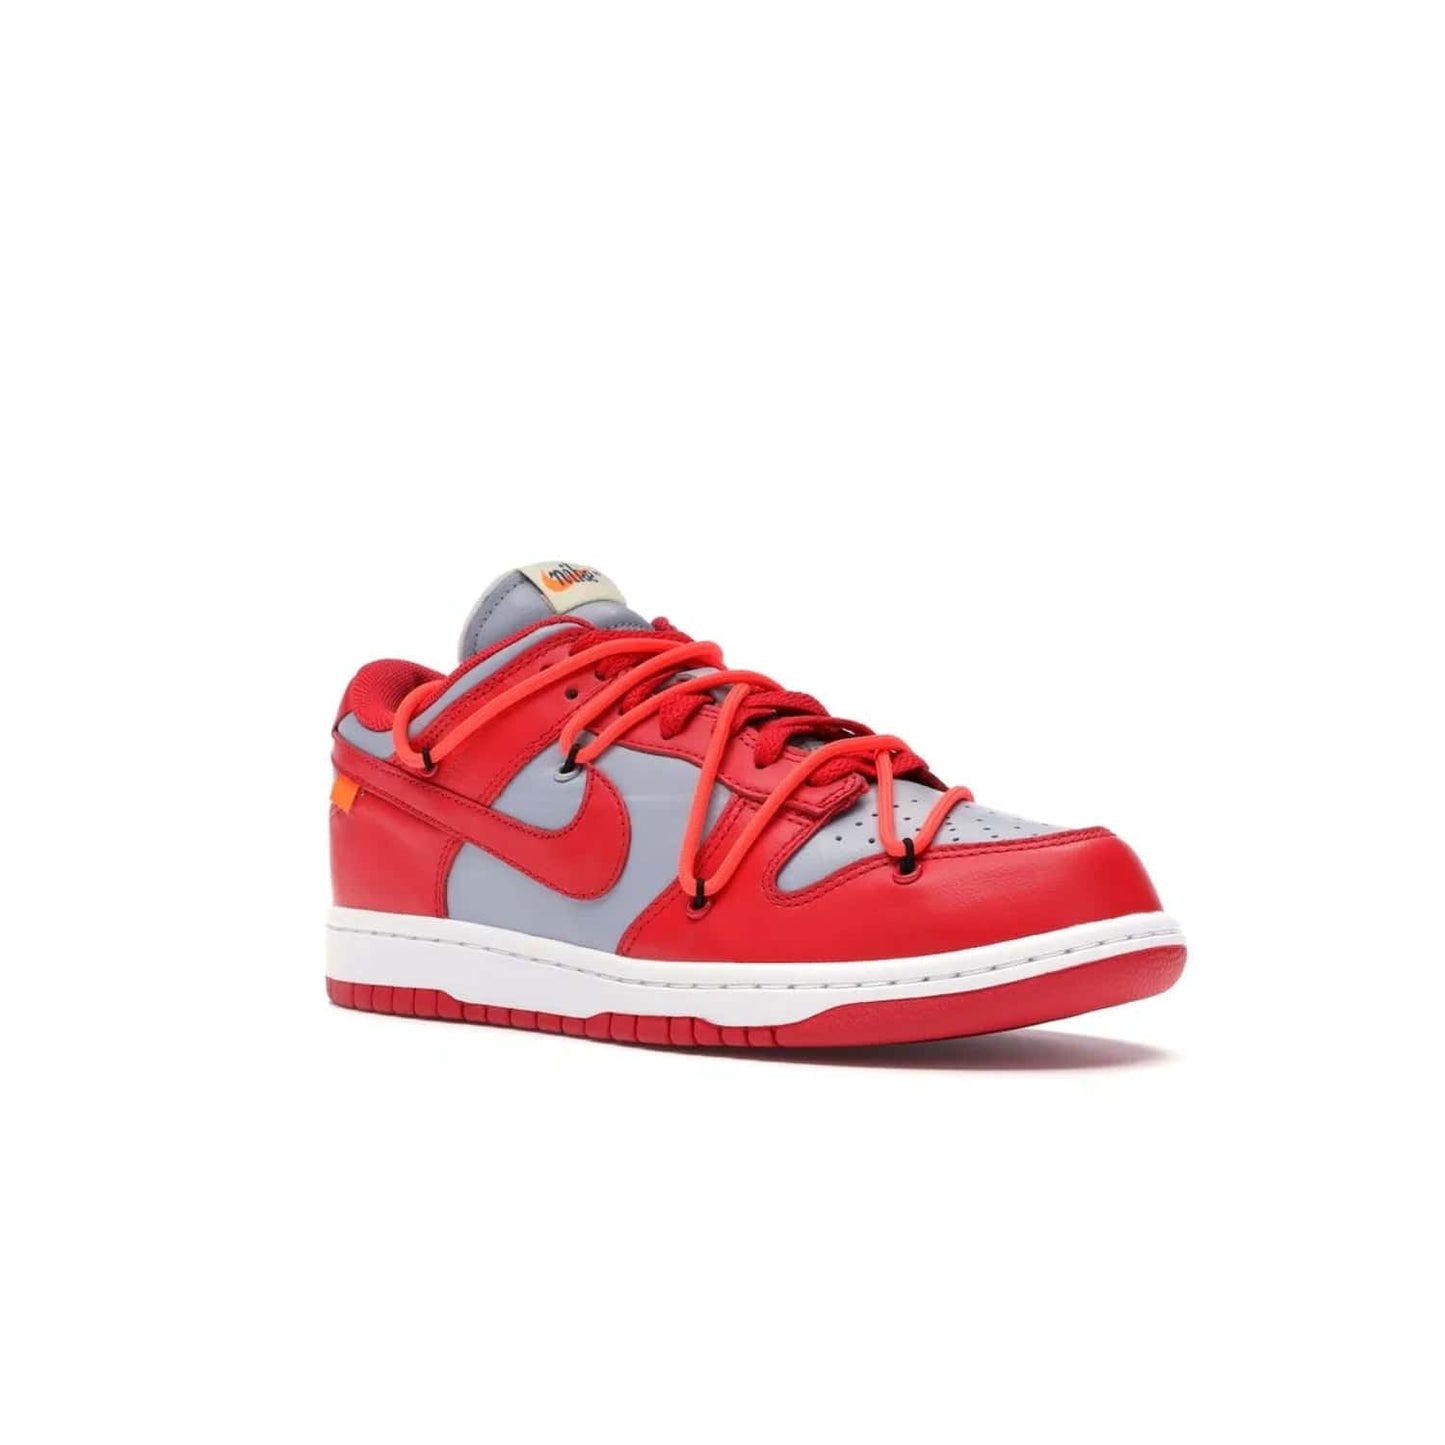 Nike Dunk Low Off-White University Red - Image 5 - Only at www.BallersClubKickz.com - The Nike Dunk Low Off-White University Red offers tribute to classic Nike Basketball silhouettes. Features include wolf grey leather, university red overlays, zip-ties, and Off-White text. Perfect for any sneaker fan, these stylish sneakers released in December of 2019.